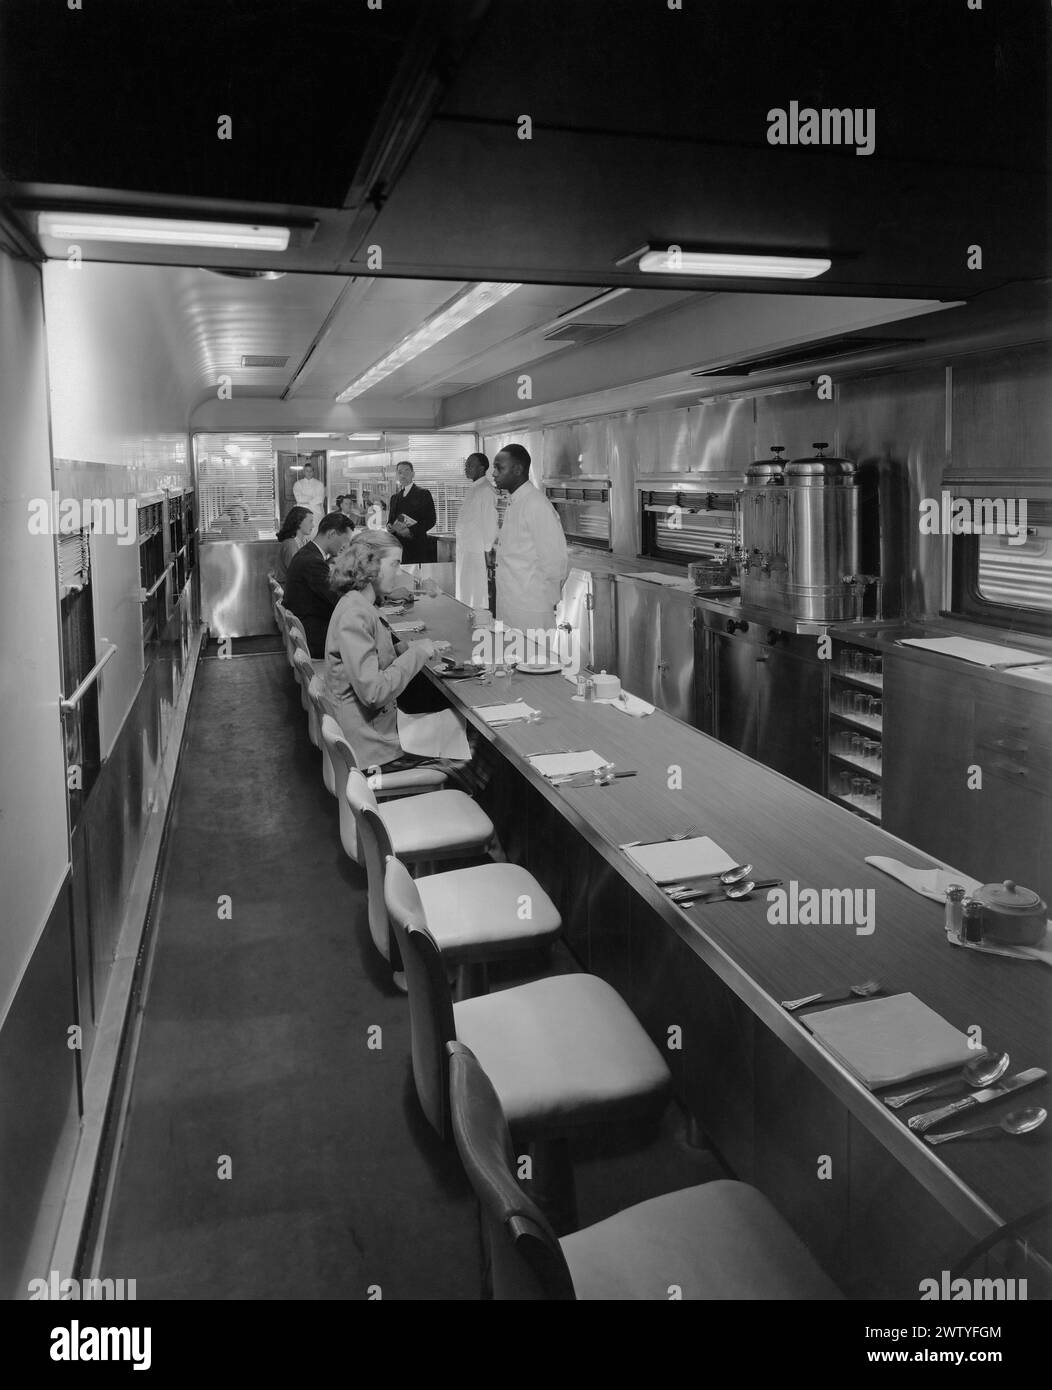 Interior view of people eating in one of the dining cars in which a Fred Harvey business was operating on the Santa Fe Railway Stock Photo